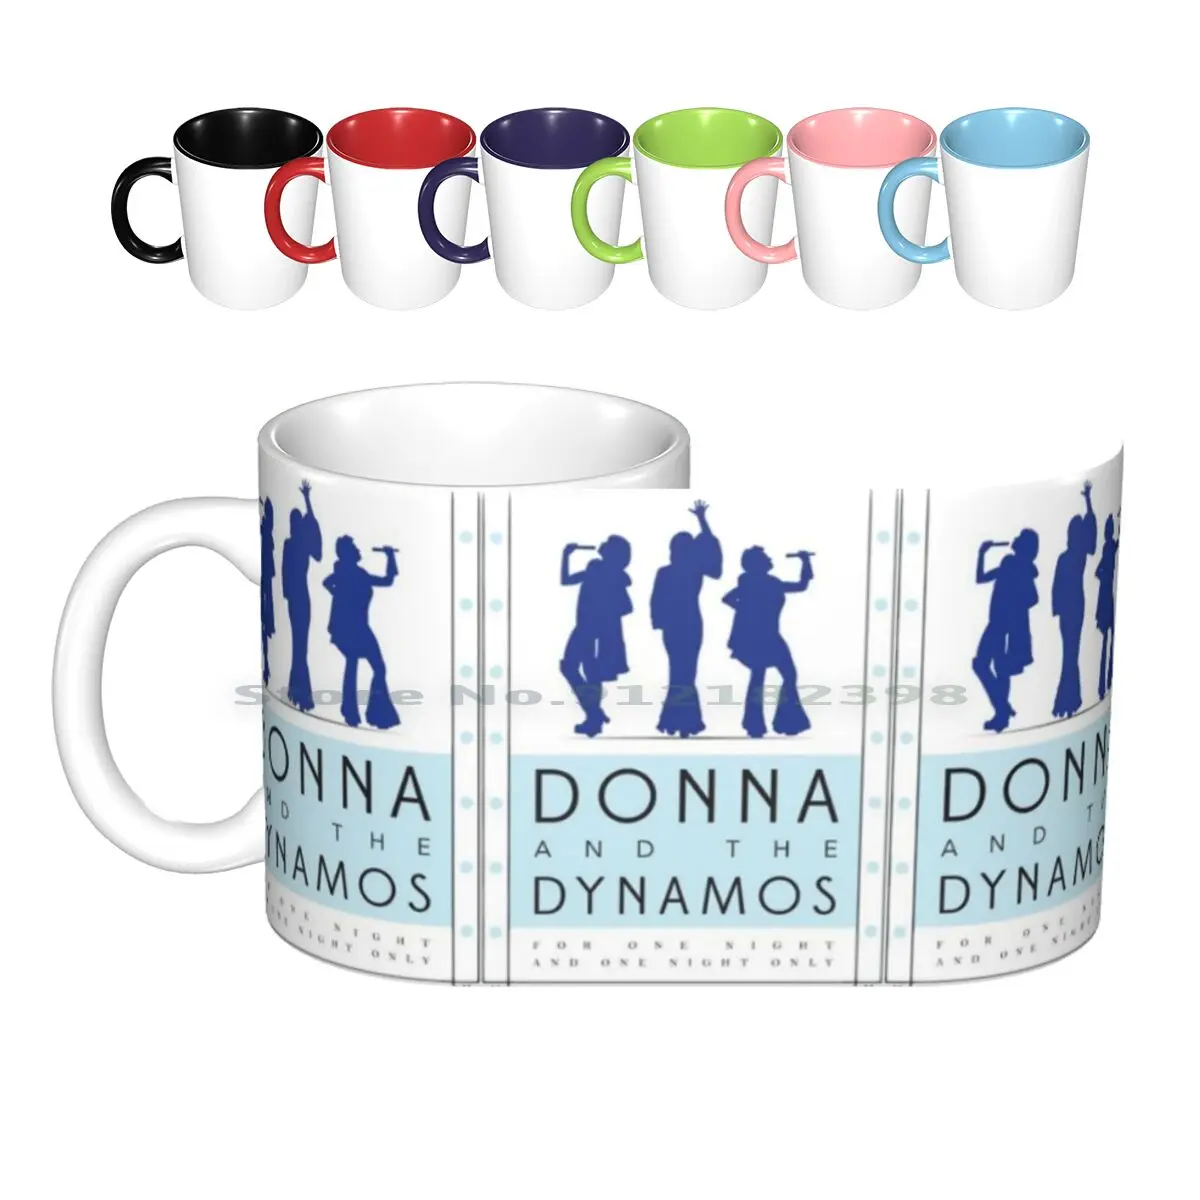 

Donna And The Dynamos Ceramic Mugs Coffee Cups Milk Tea Mug Donna And The Dynamos Mia Here We Go Again Silhouette Band Music